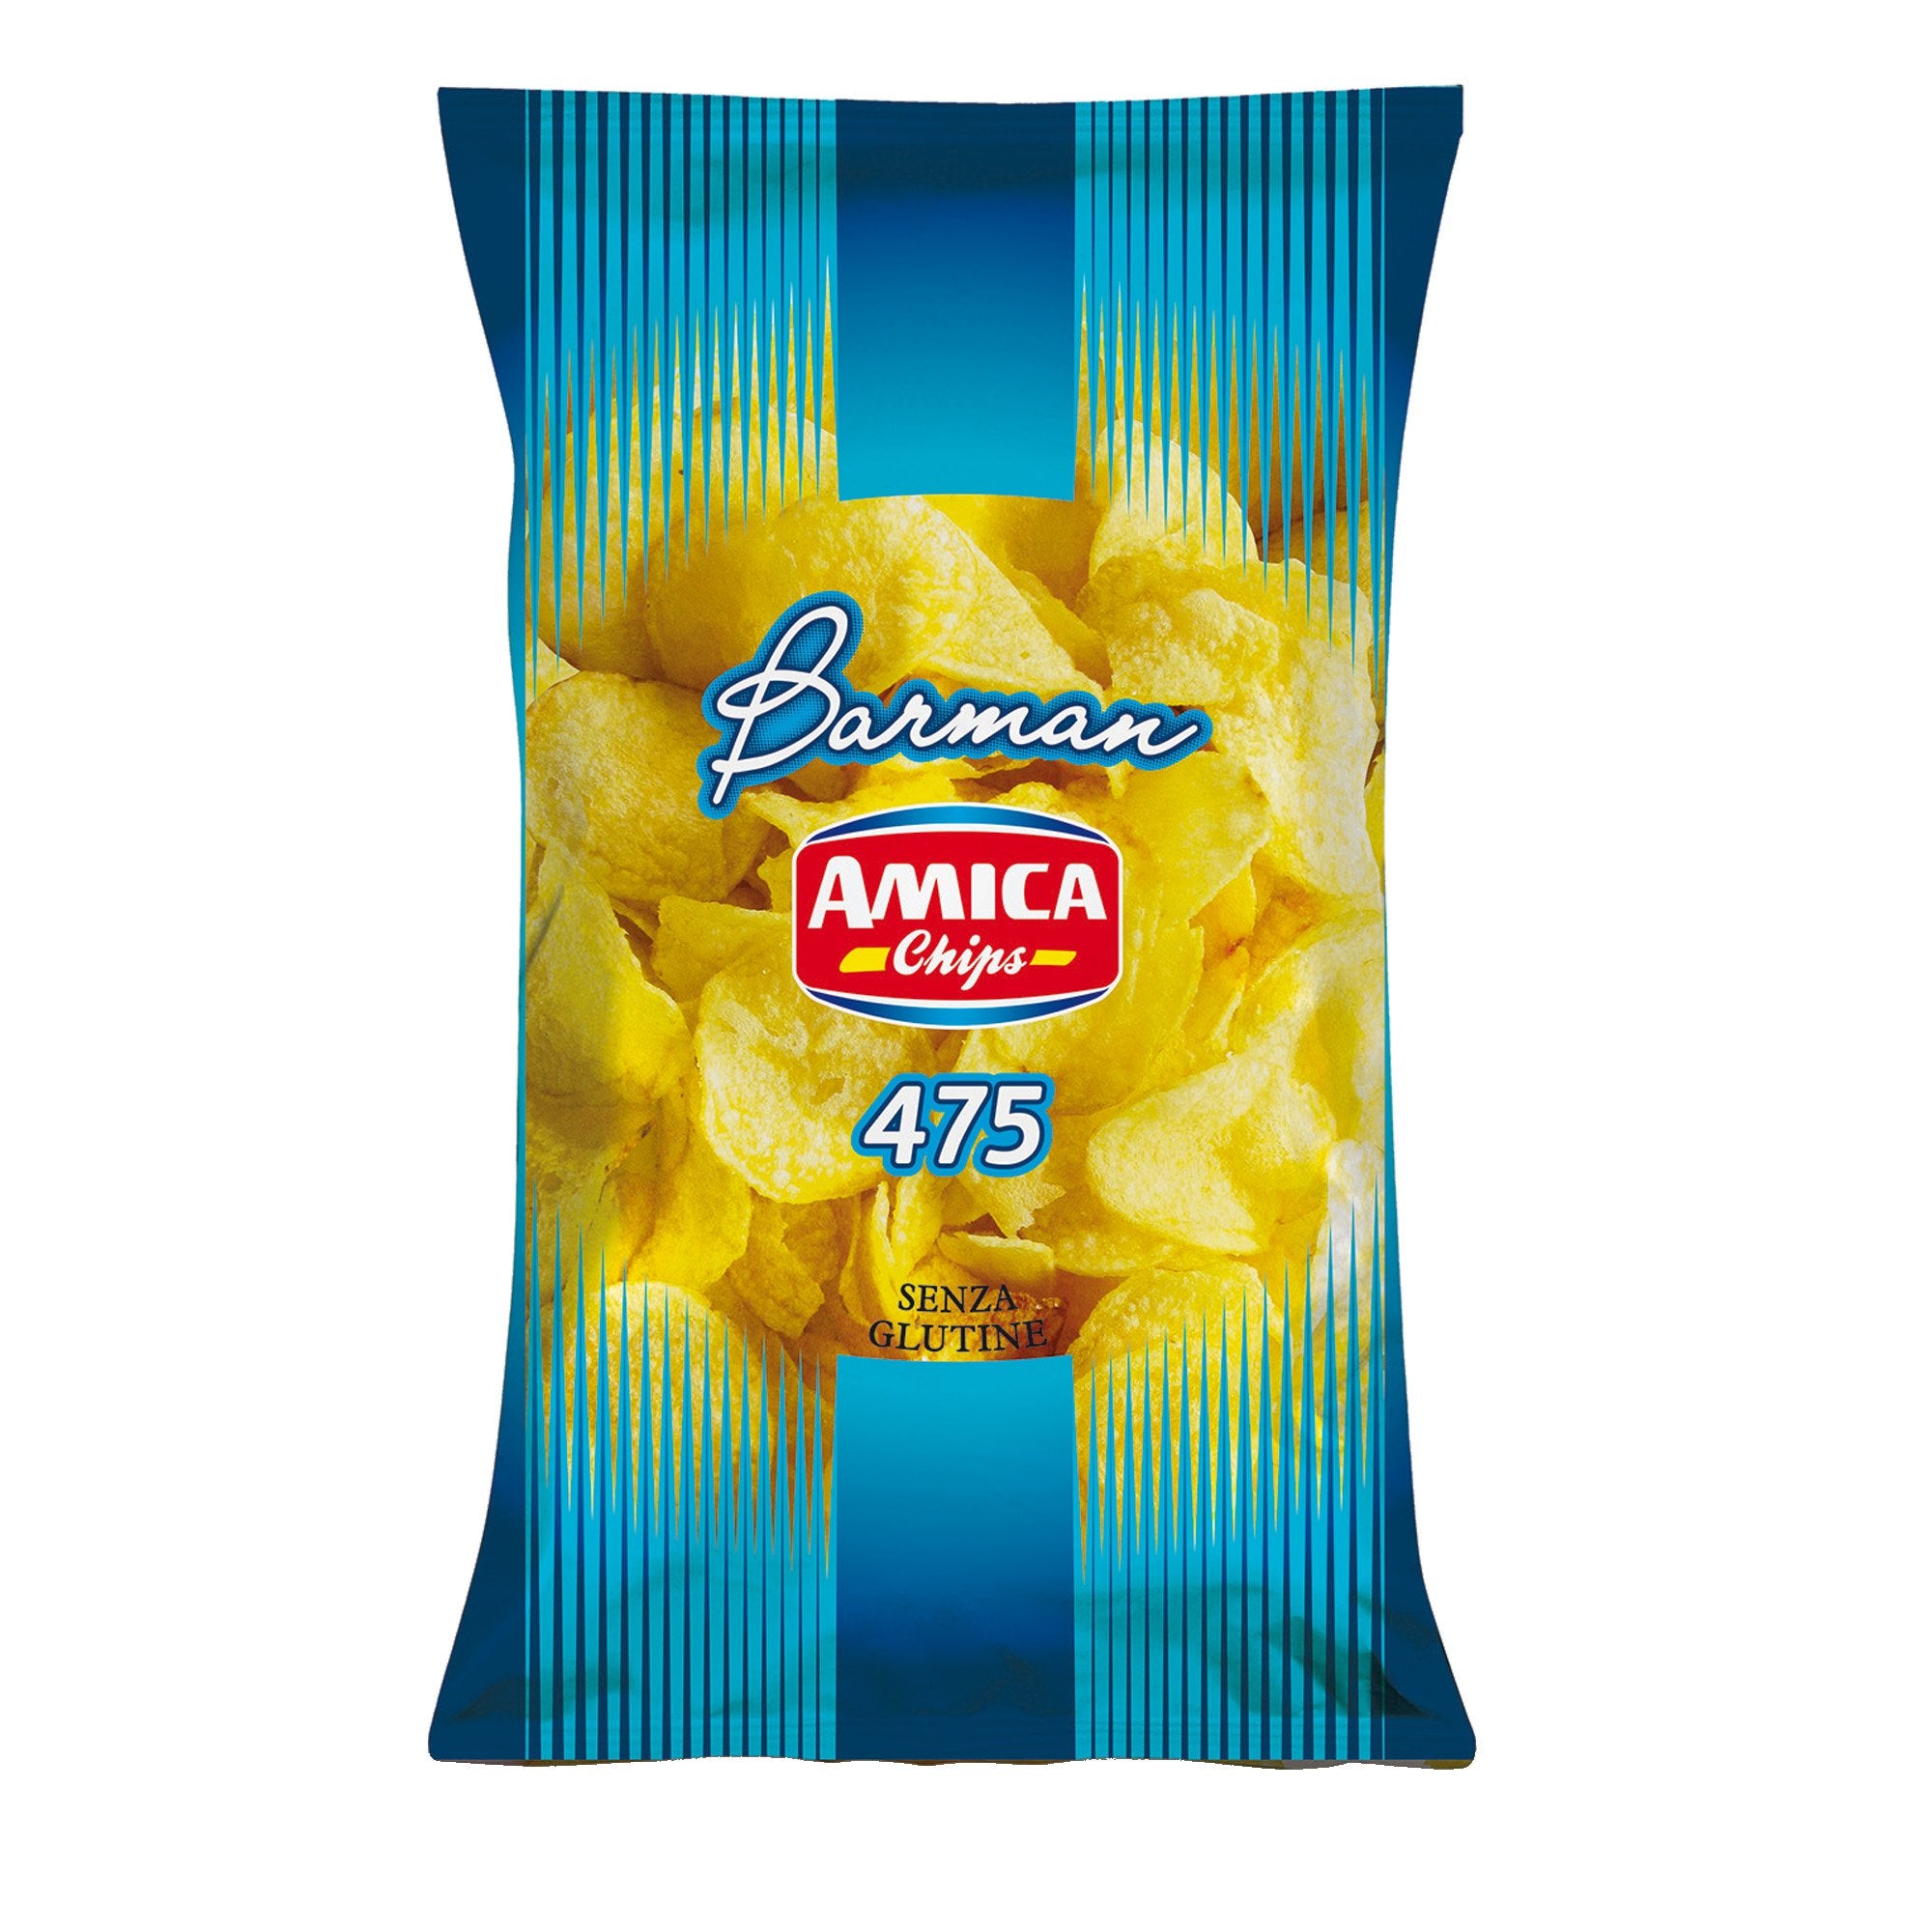 amica-chips-patatina-classica-475gr-amicachips